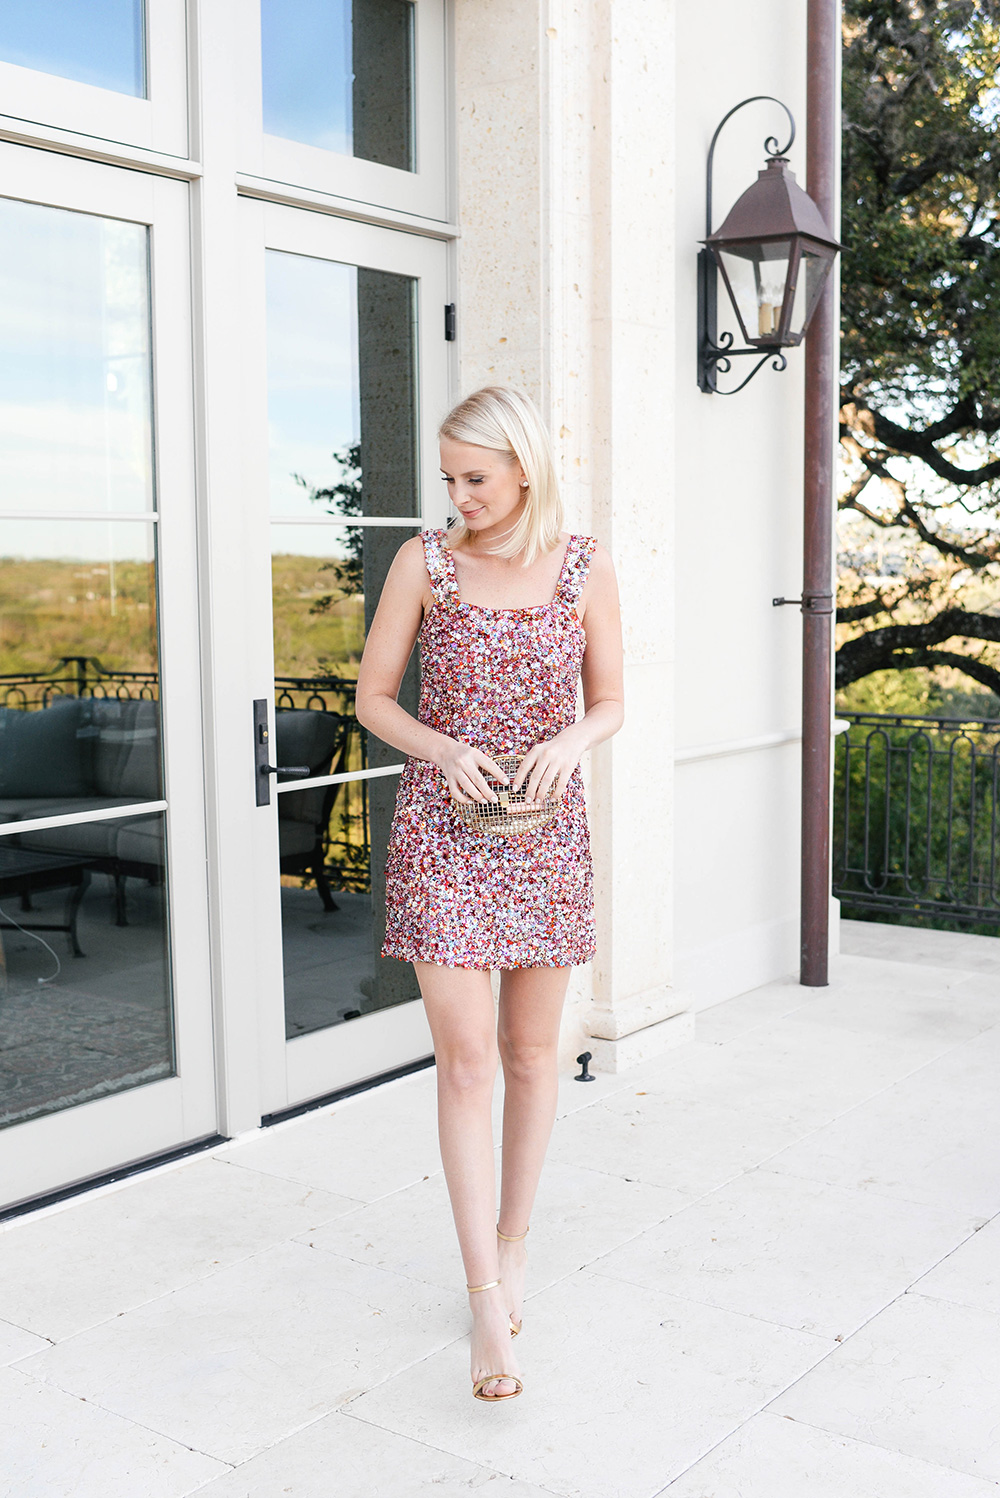 Alexis Sequin Dress | Holiday Party Outfit Guide 